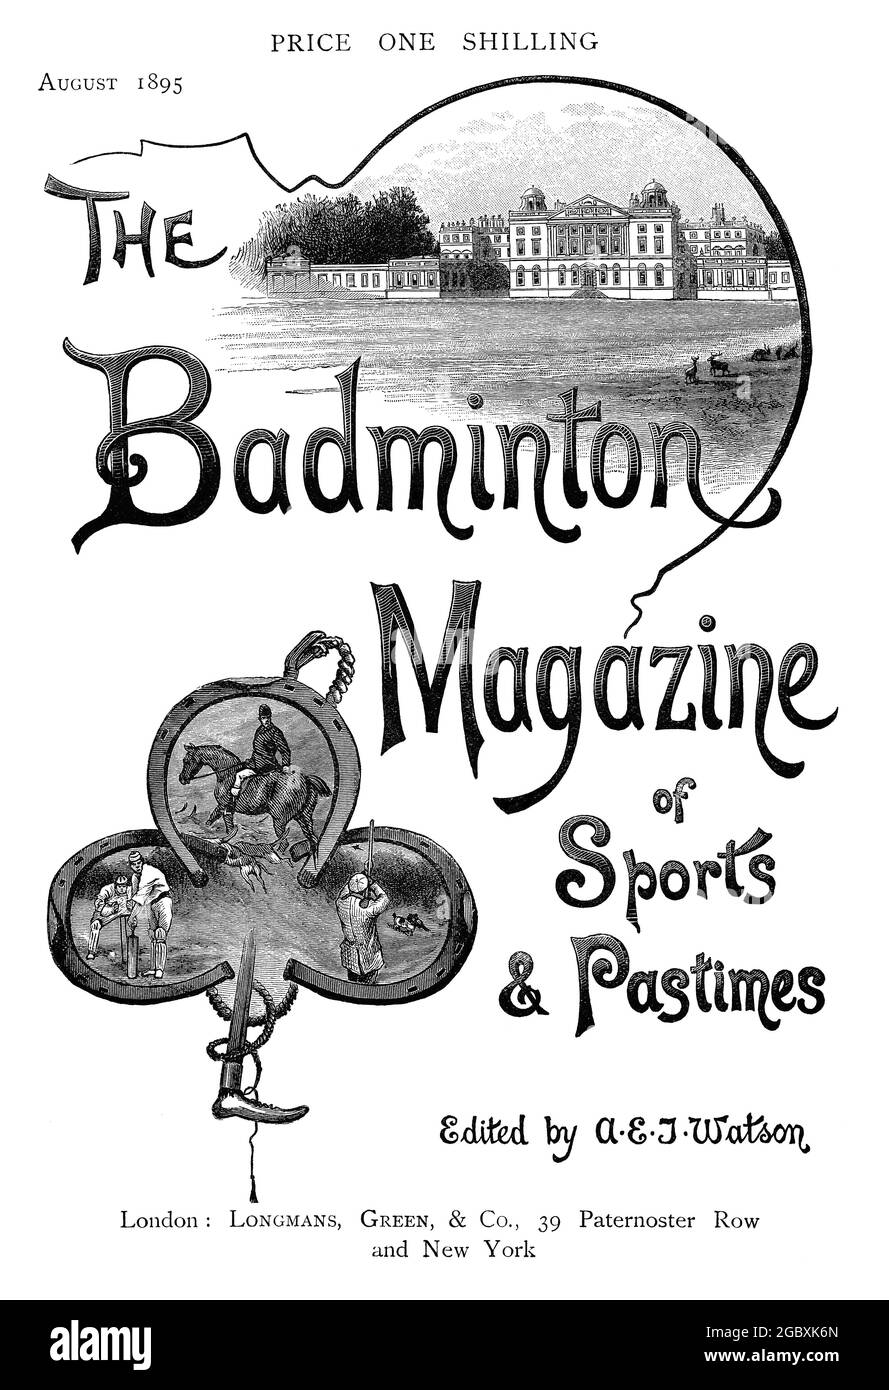 1895 British advertisement for The Badminton Magazine Of Sports And Pastimes, edited by A.E.J. Watson. Stock Photo